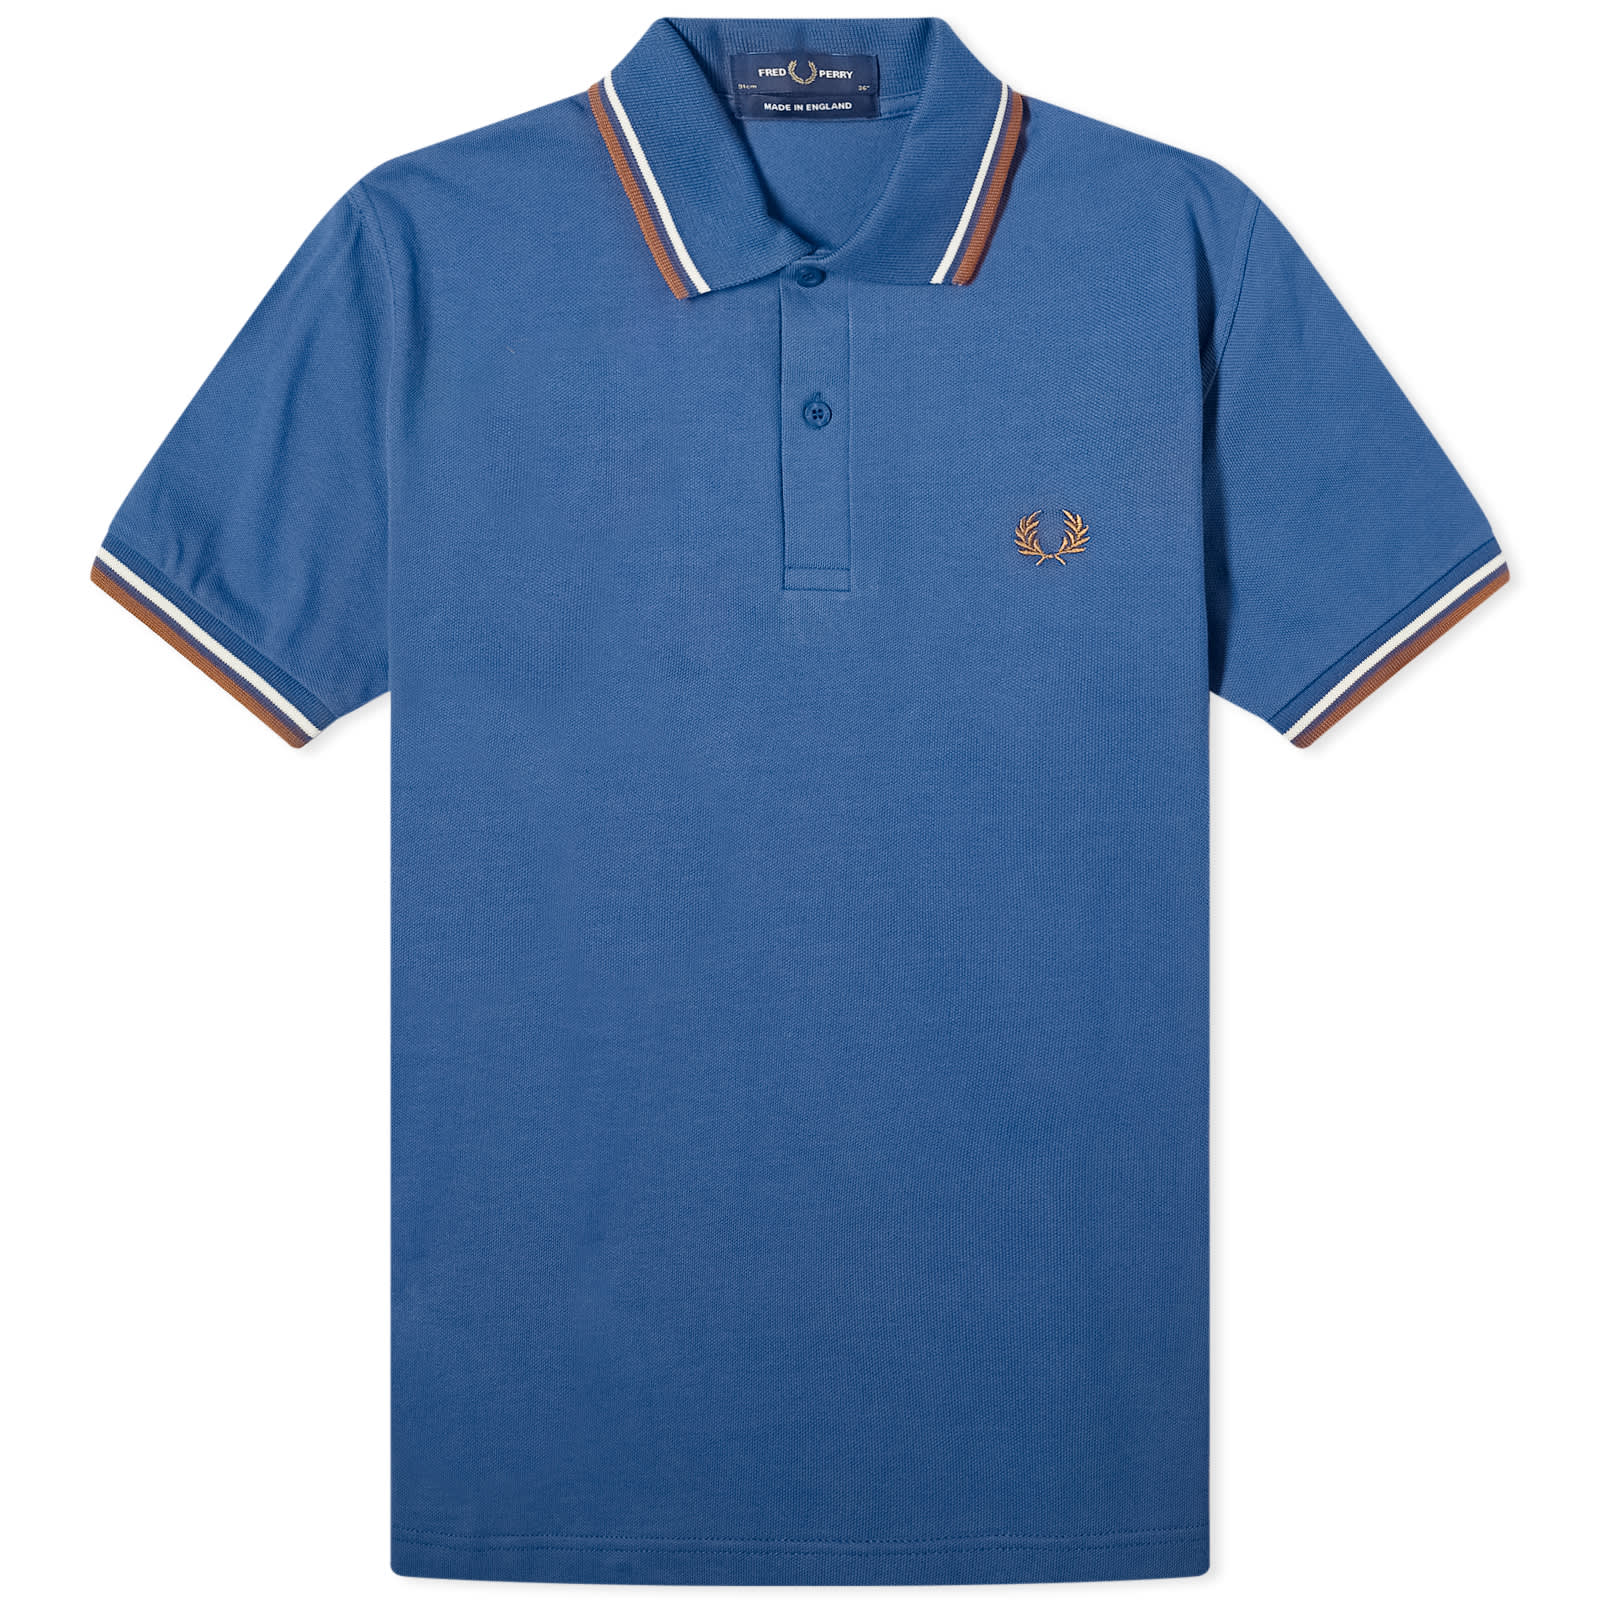 Поло Fred Perry Twin Tipped, цвет Blue, Ecru & Caramel футболка fred perry long sleeve twin tipped tee